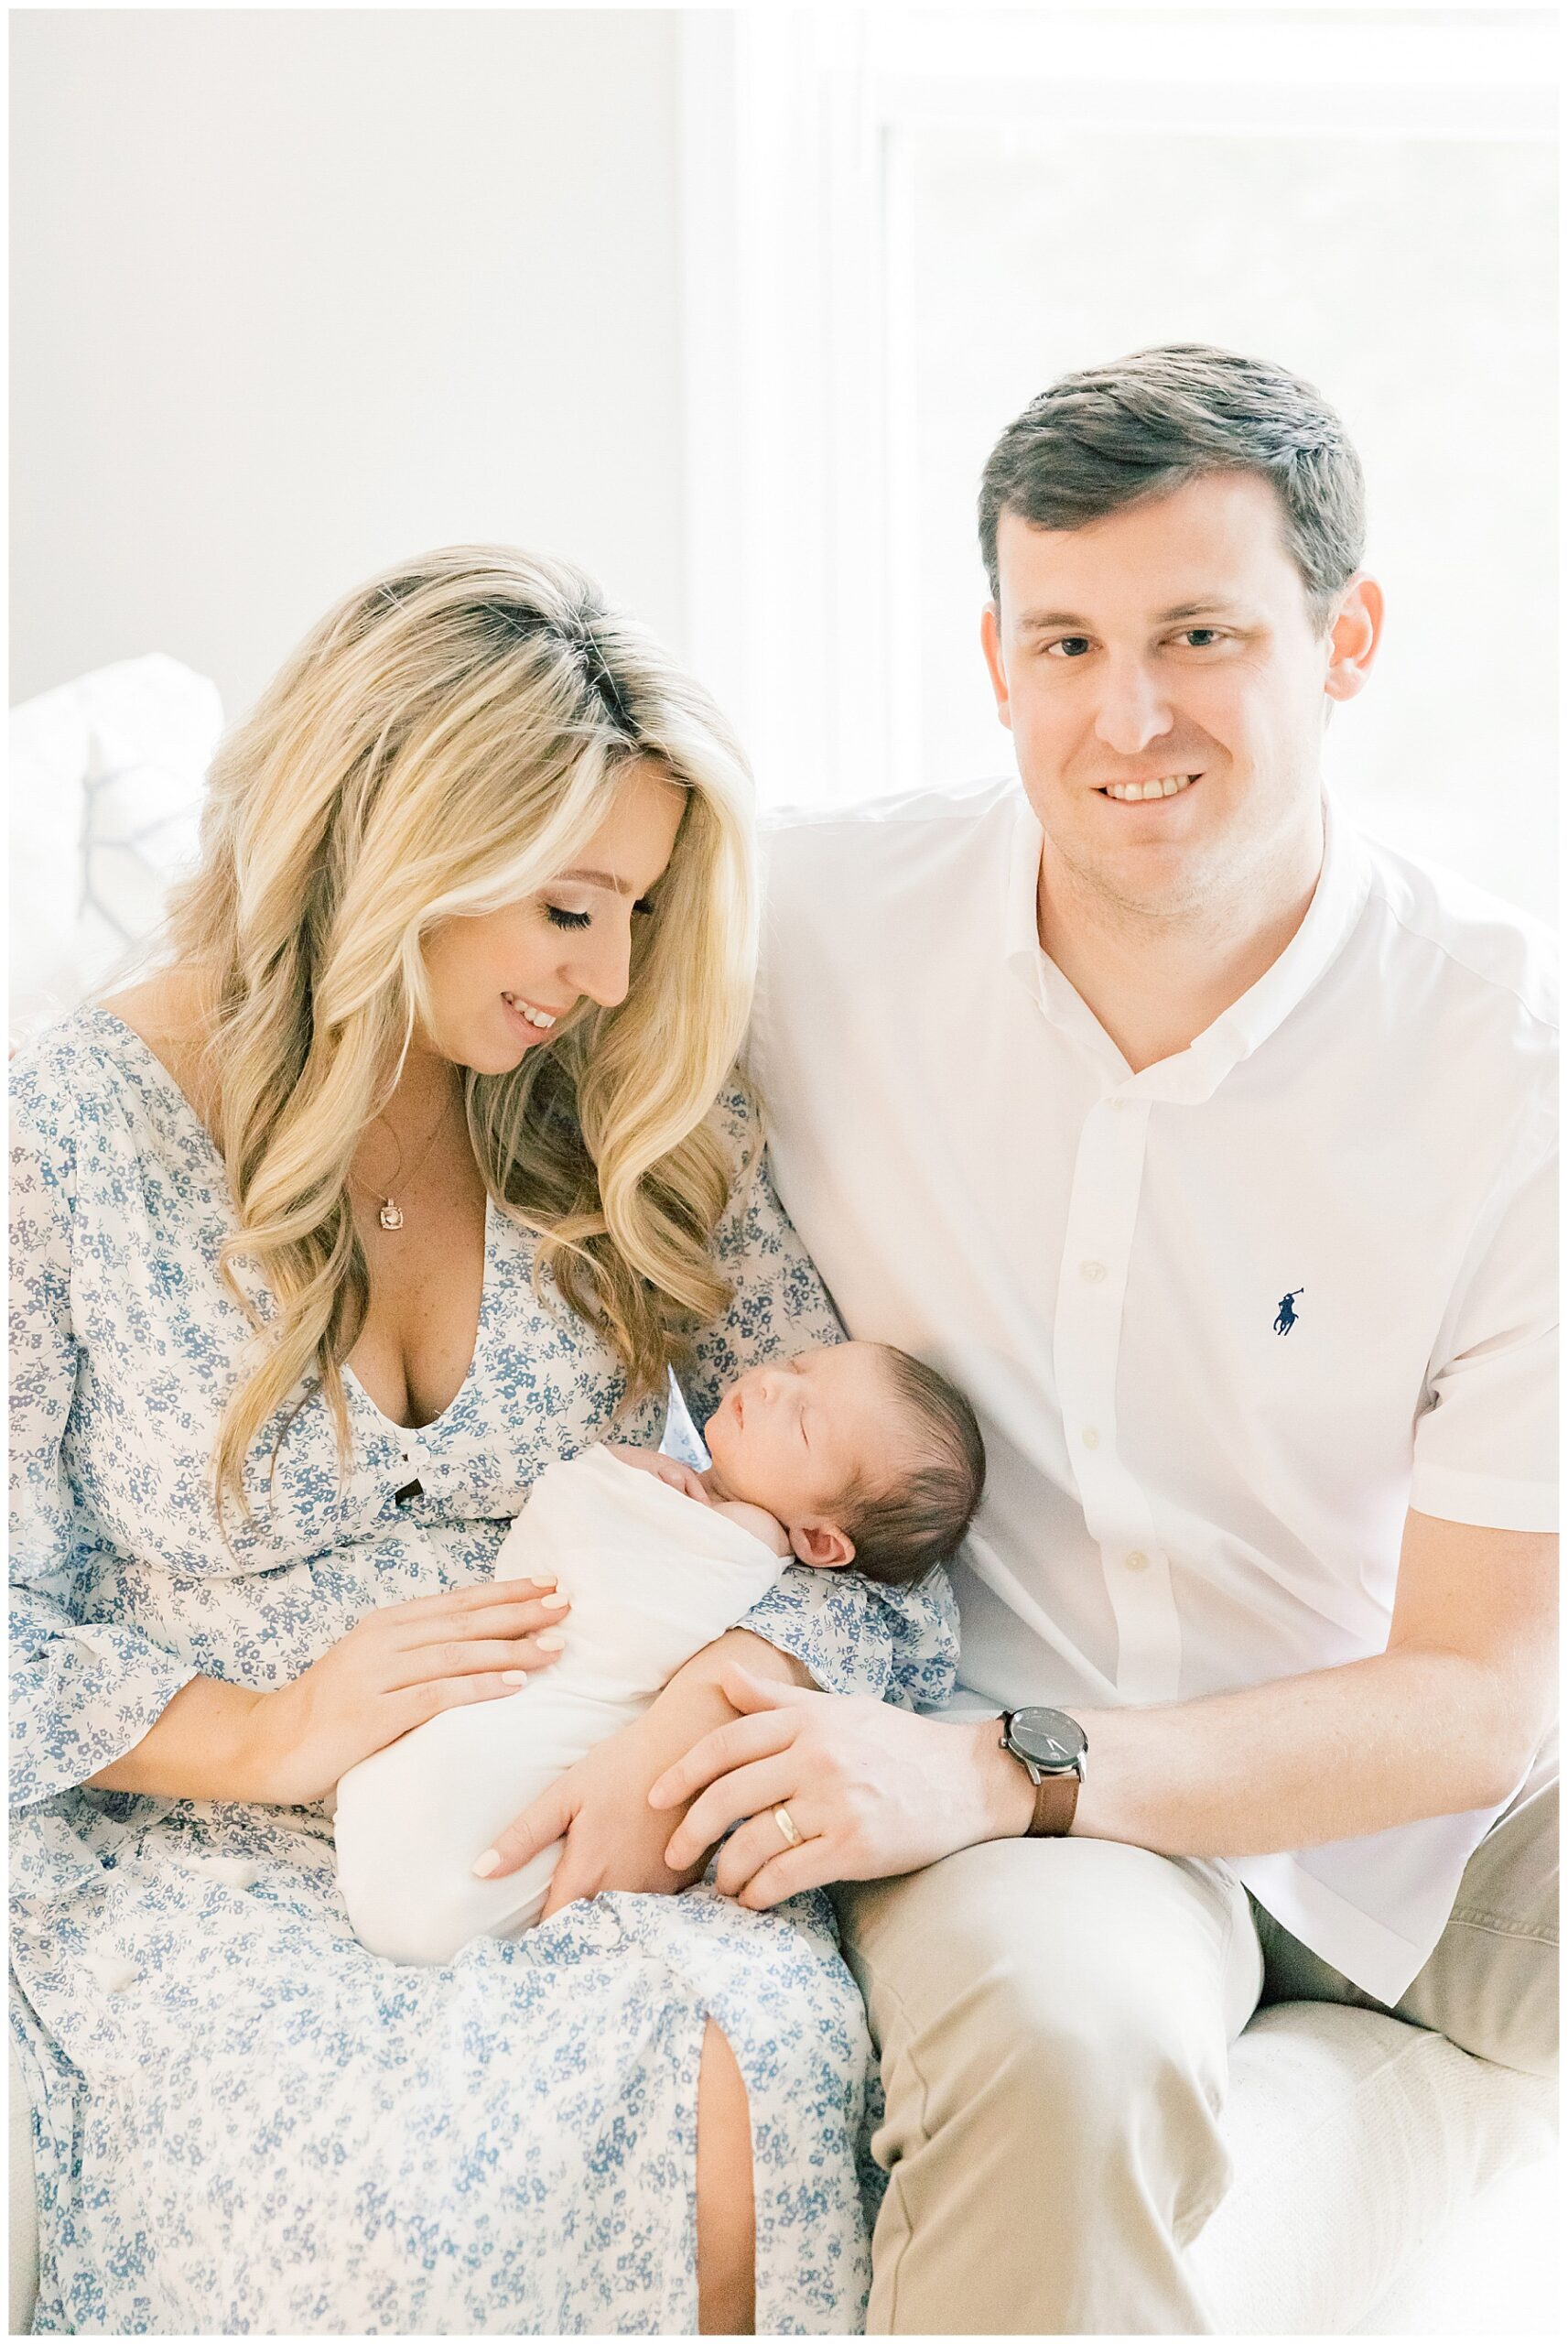 Mama and dad with newborn baby boy - Katie Petrick Photography